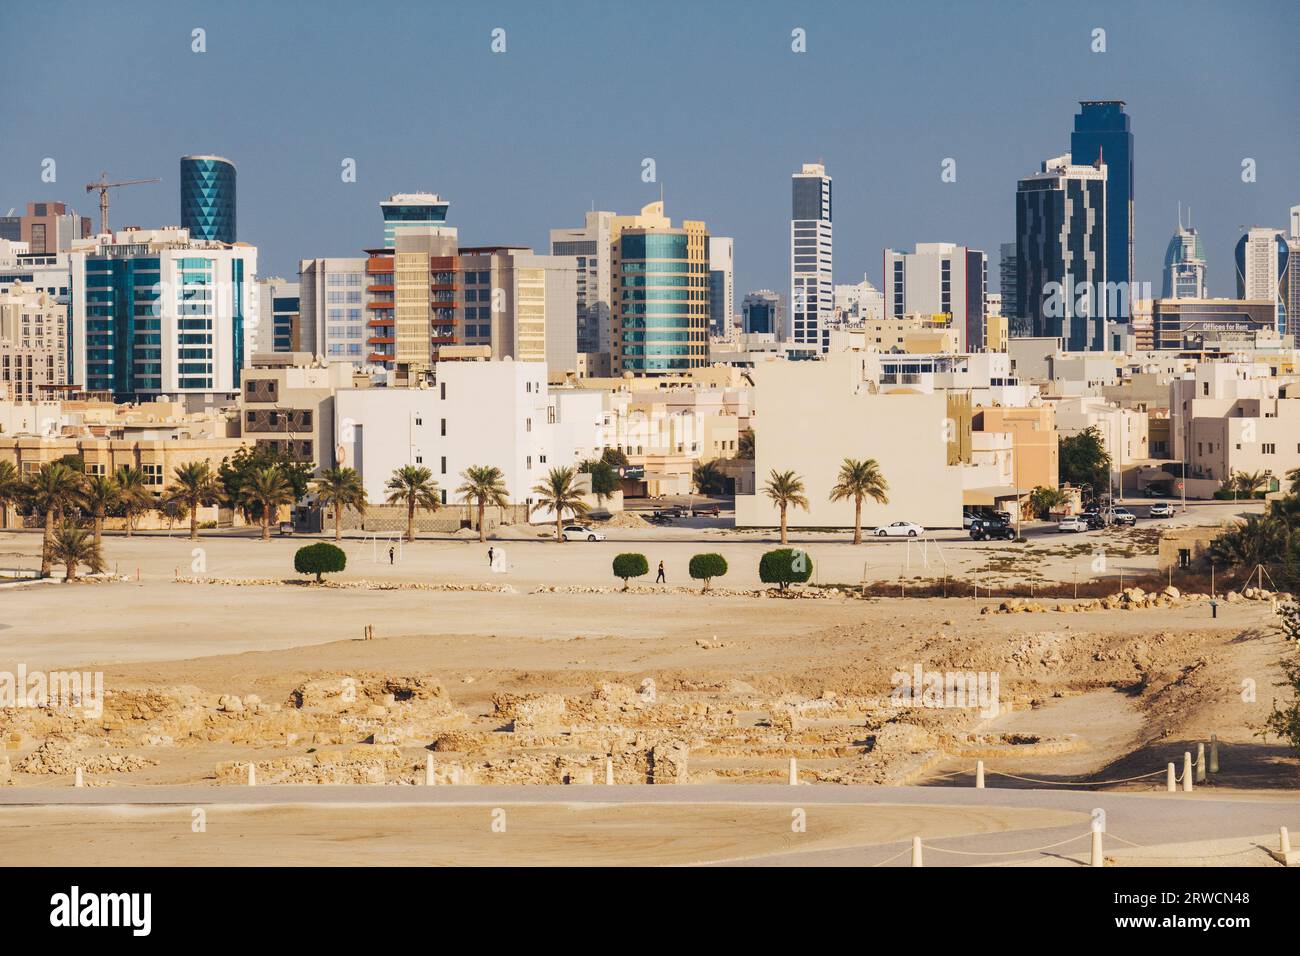 One of the many skylines of Manama, capital city of Bahrain, featuring numerous skyscrapers Stock Photo